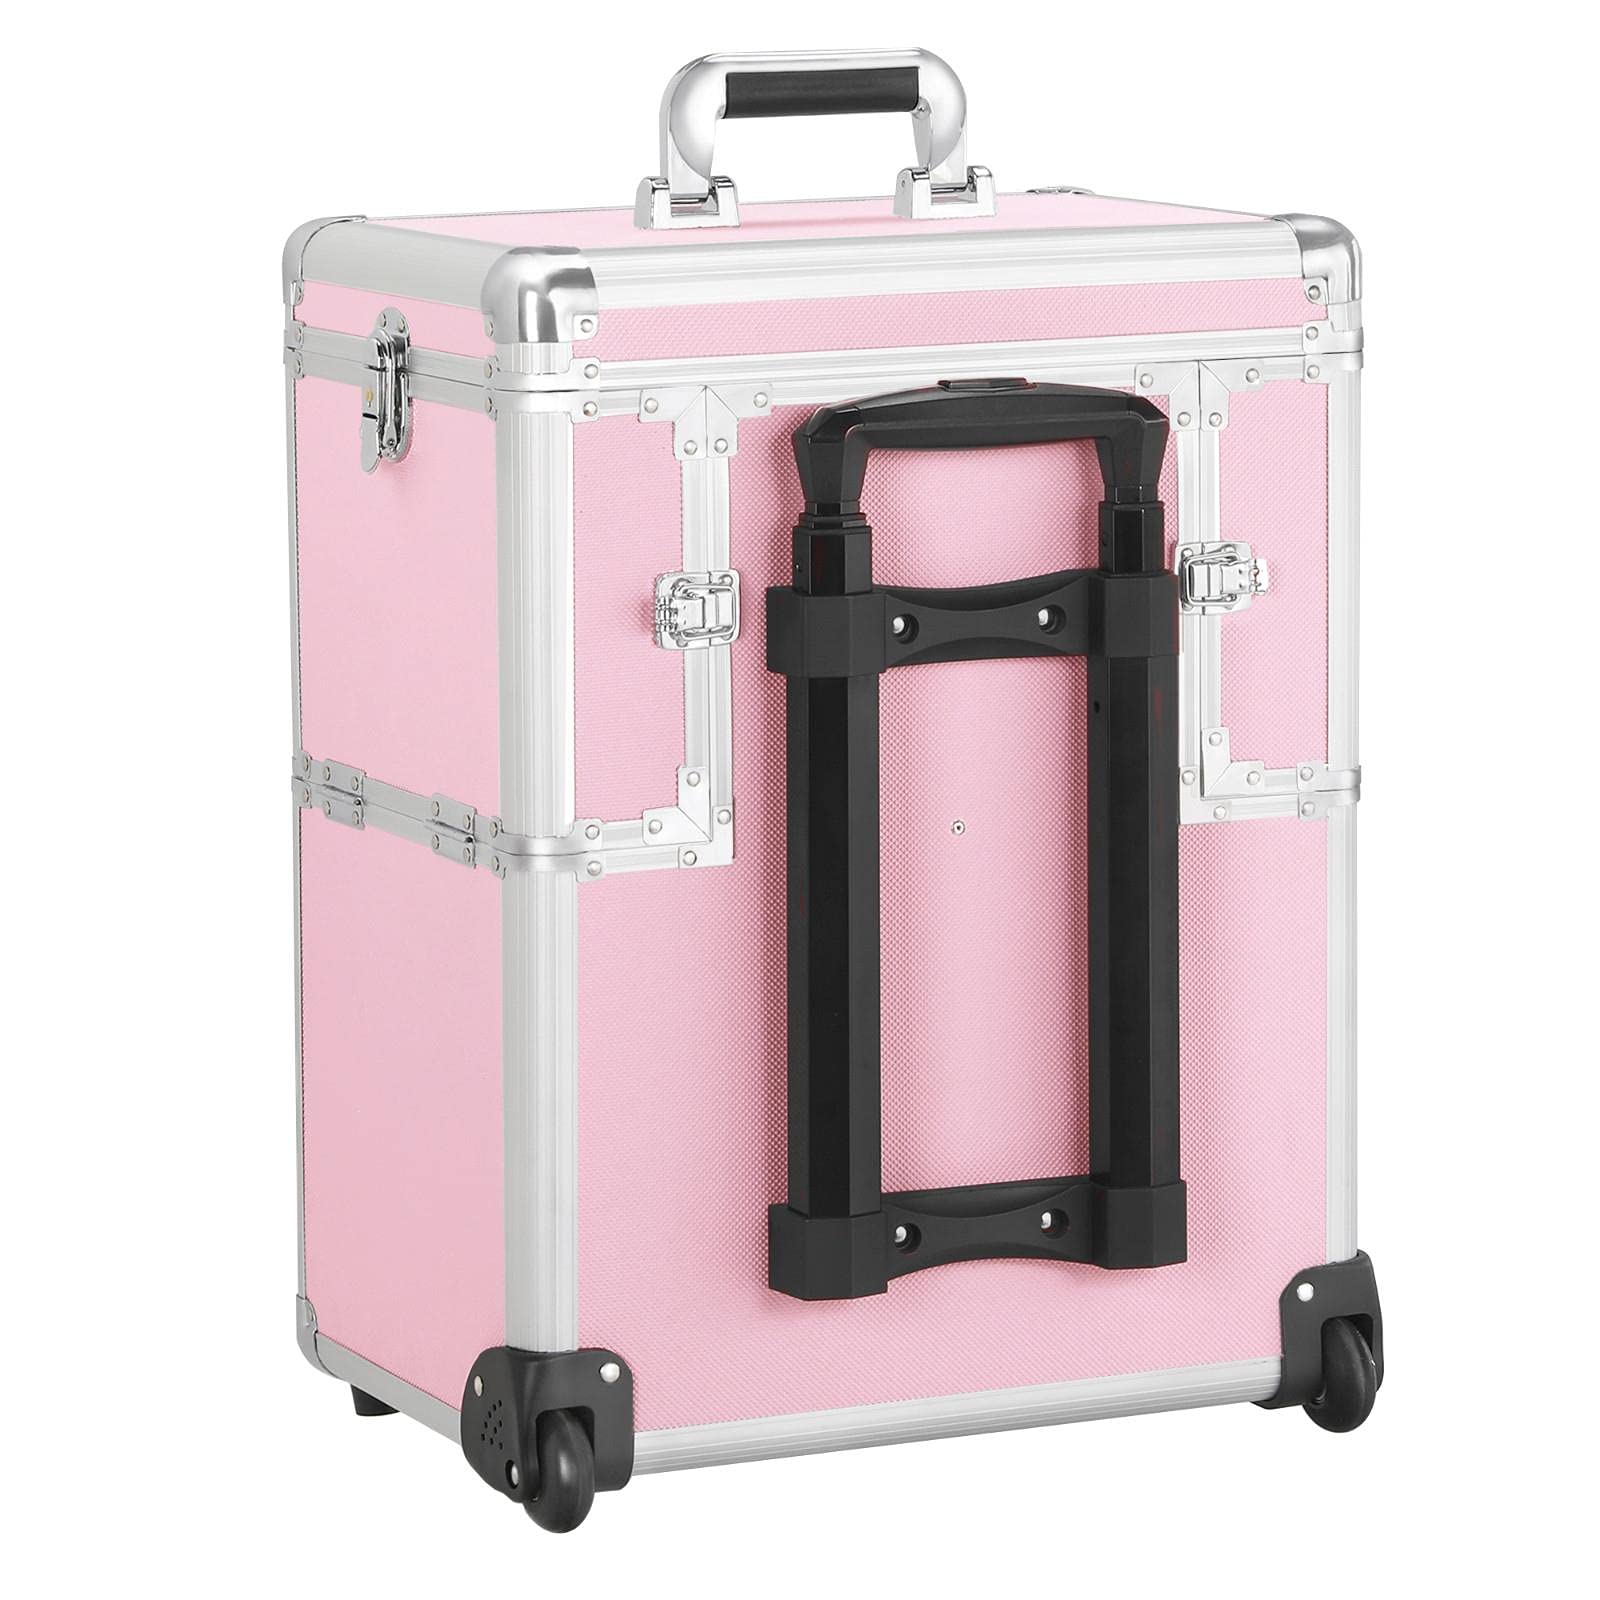 Yaheetech Professional Rolling Makeup Case Artist Travel Portable Travel Makeup Trolley Cosmetic Case Beauty Train Case Cosmetic Organizer